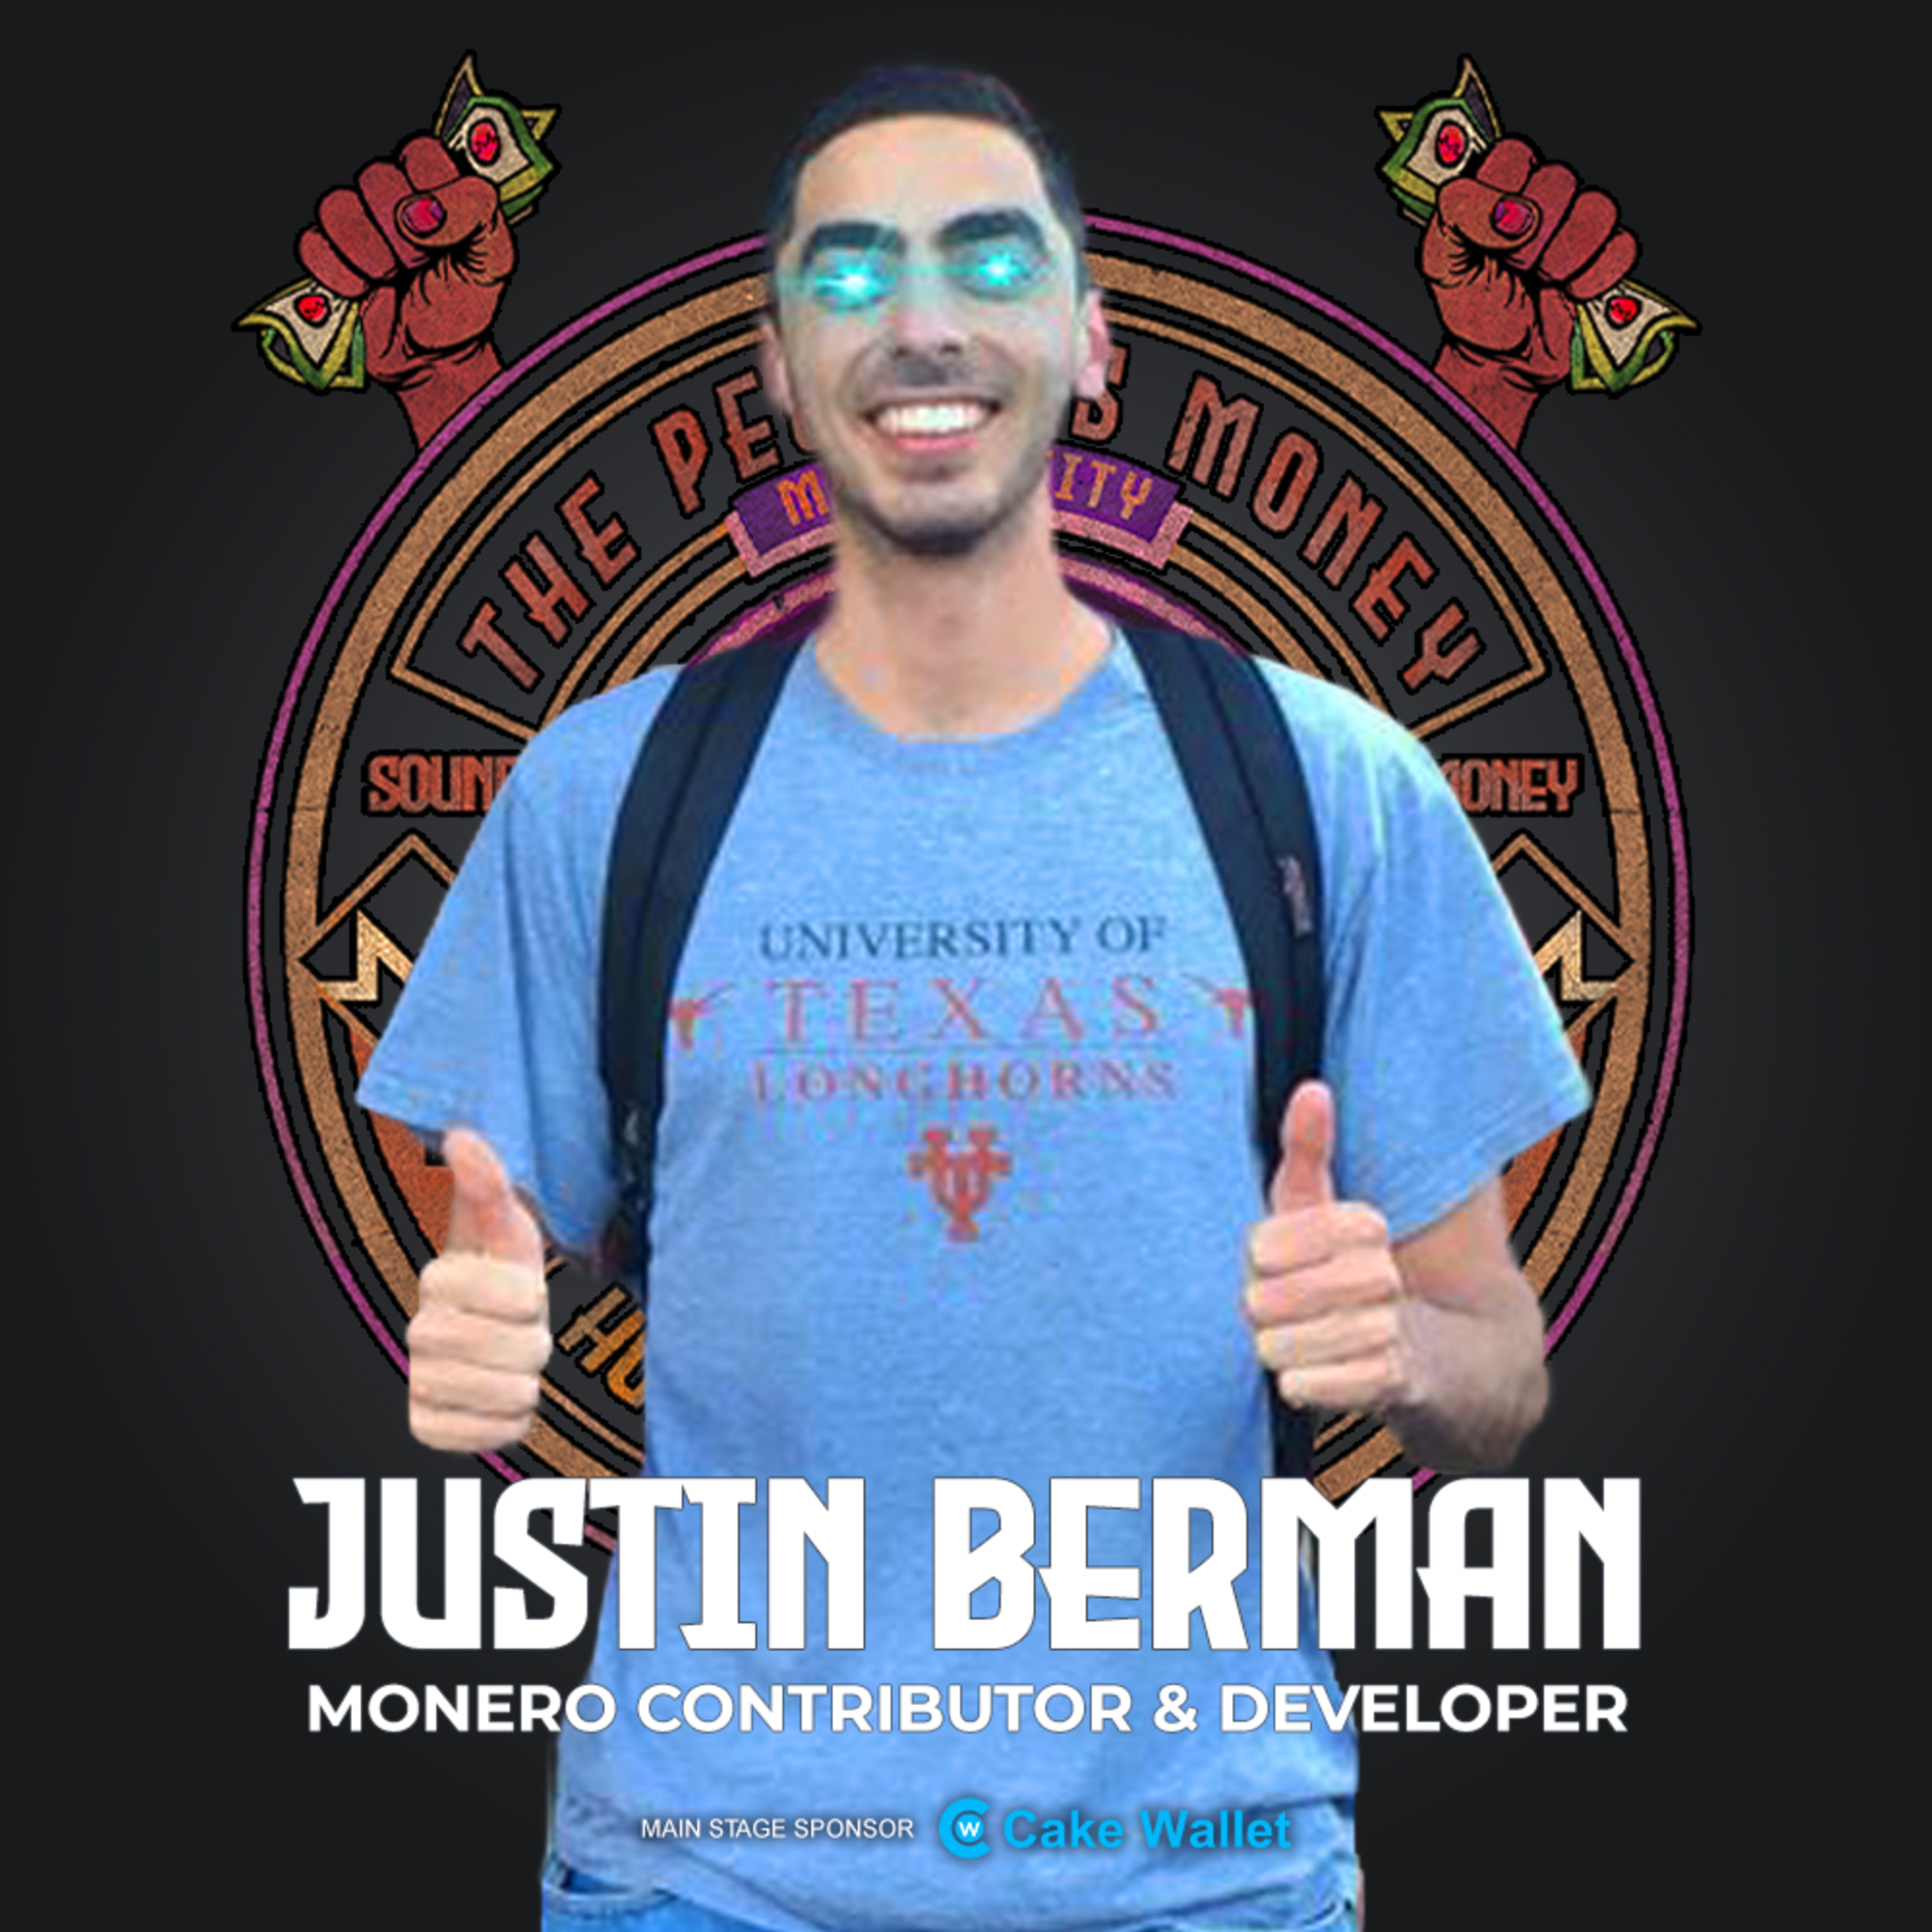 View Balance Keys: A Private Key to View All Incoming and Outgoing Transactions with JBerman (Monerotopia23)